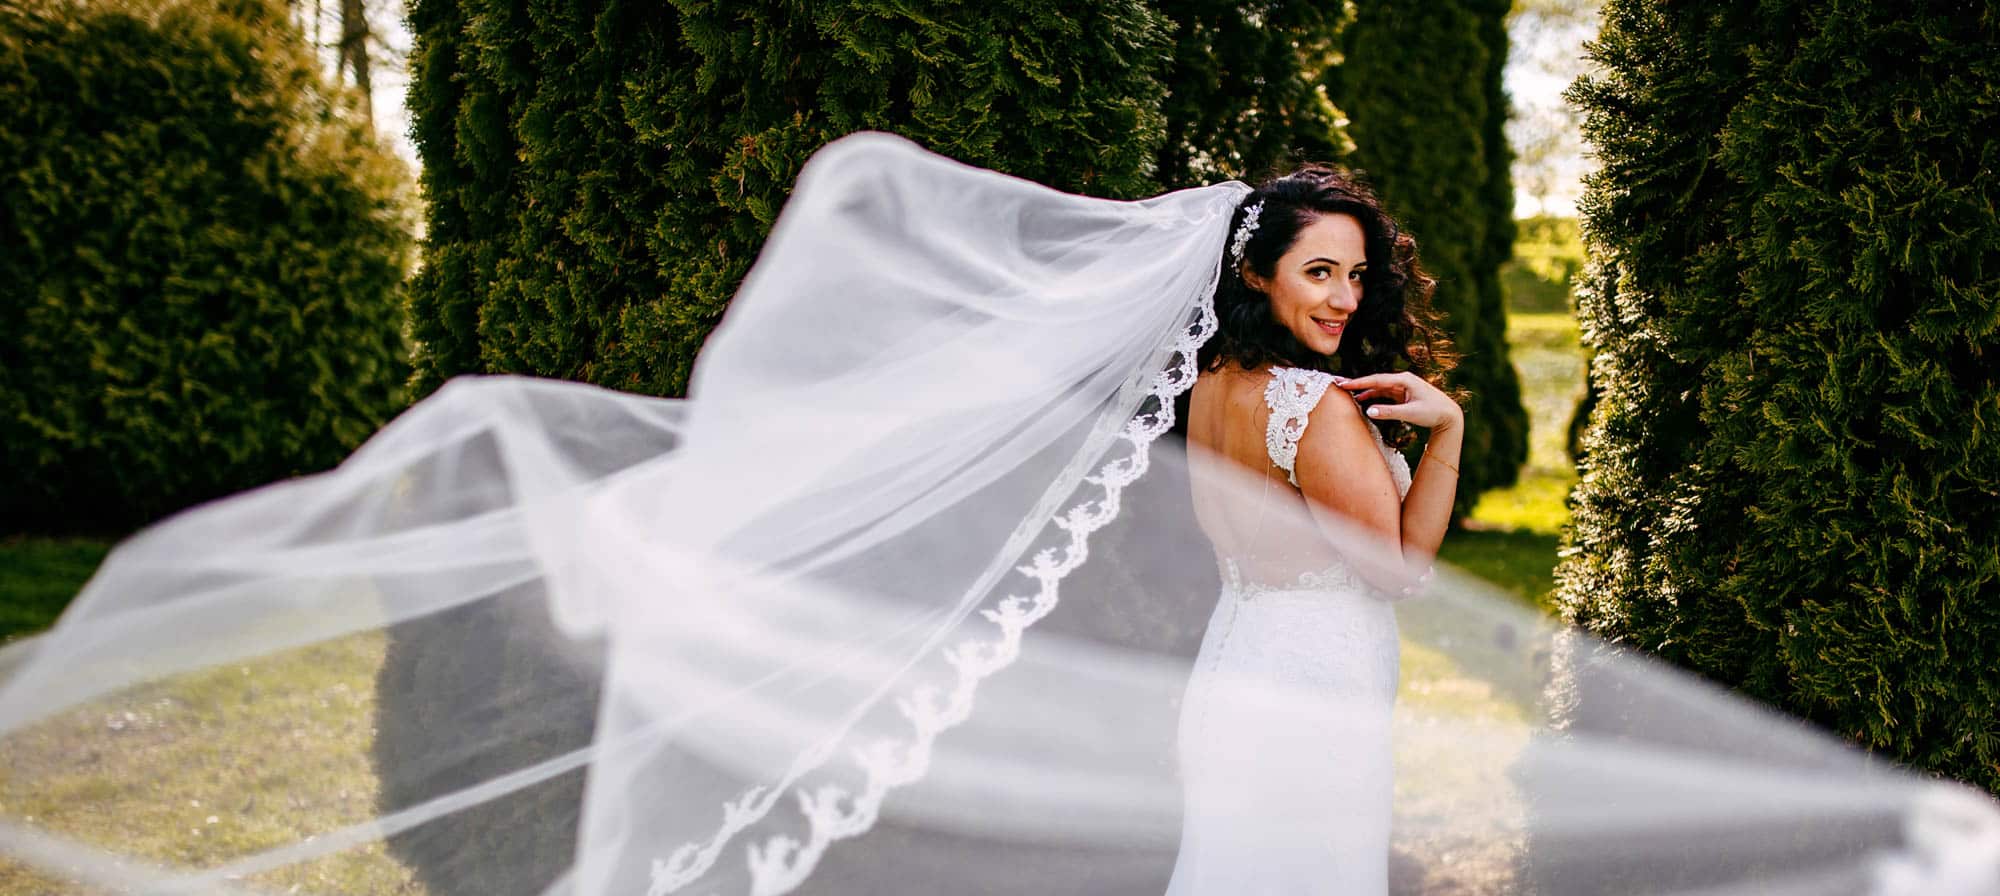 A bride in her wedding dress with her veil flapping in the wind.